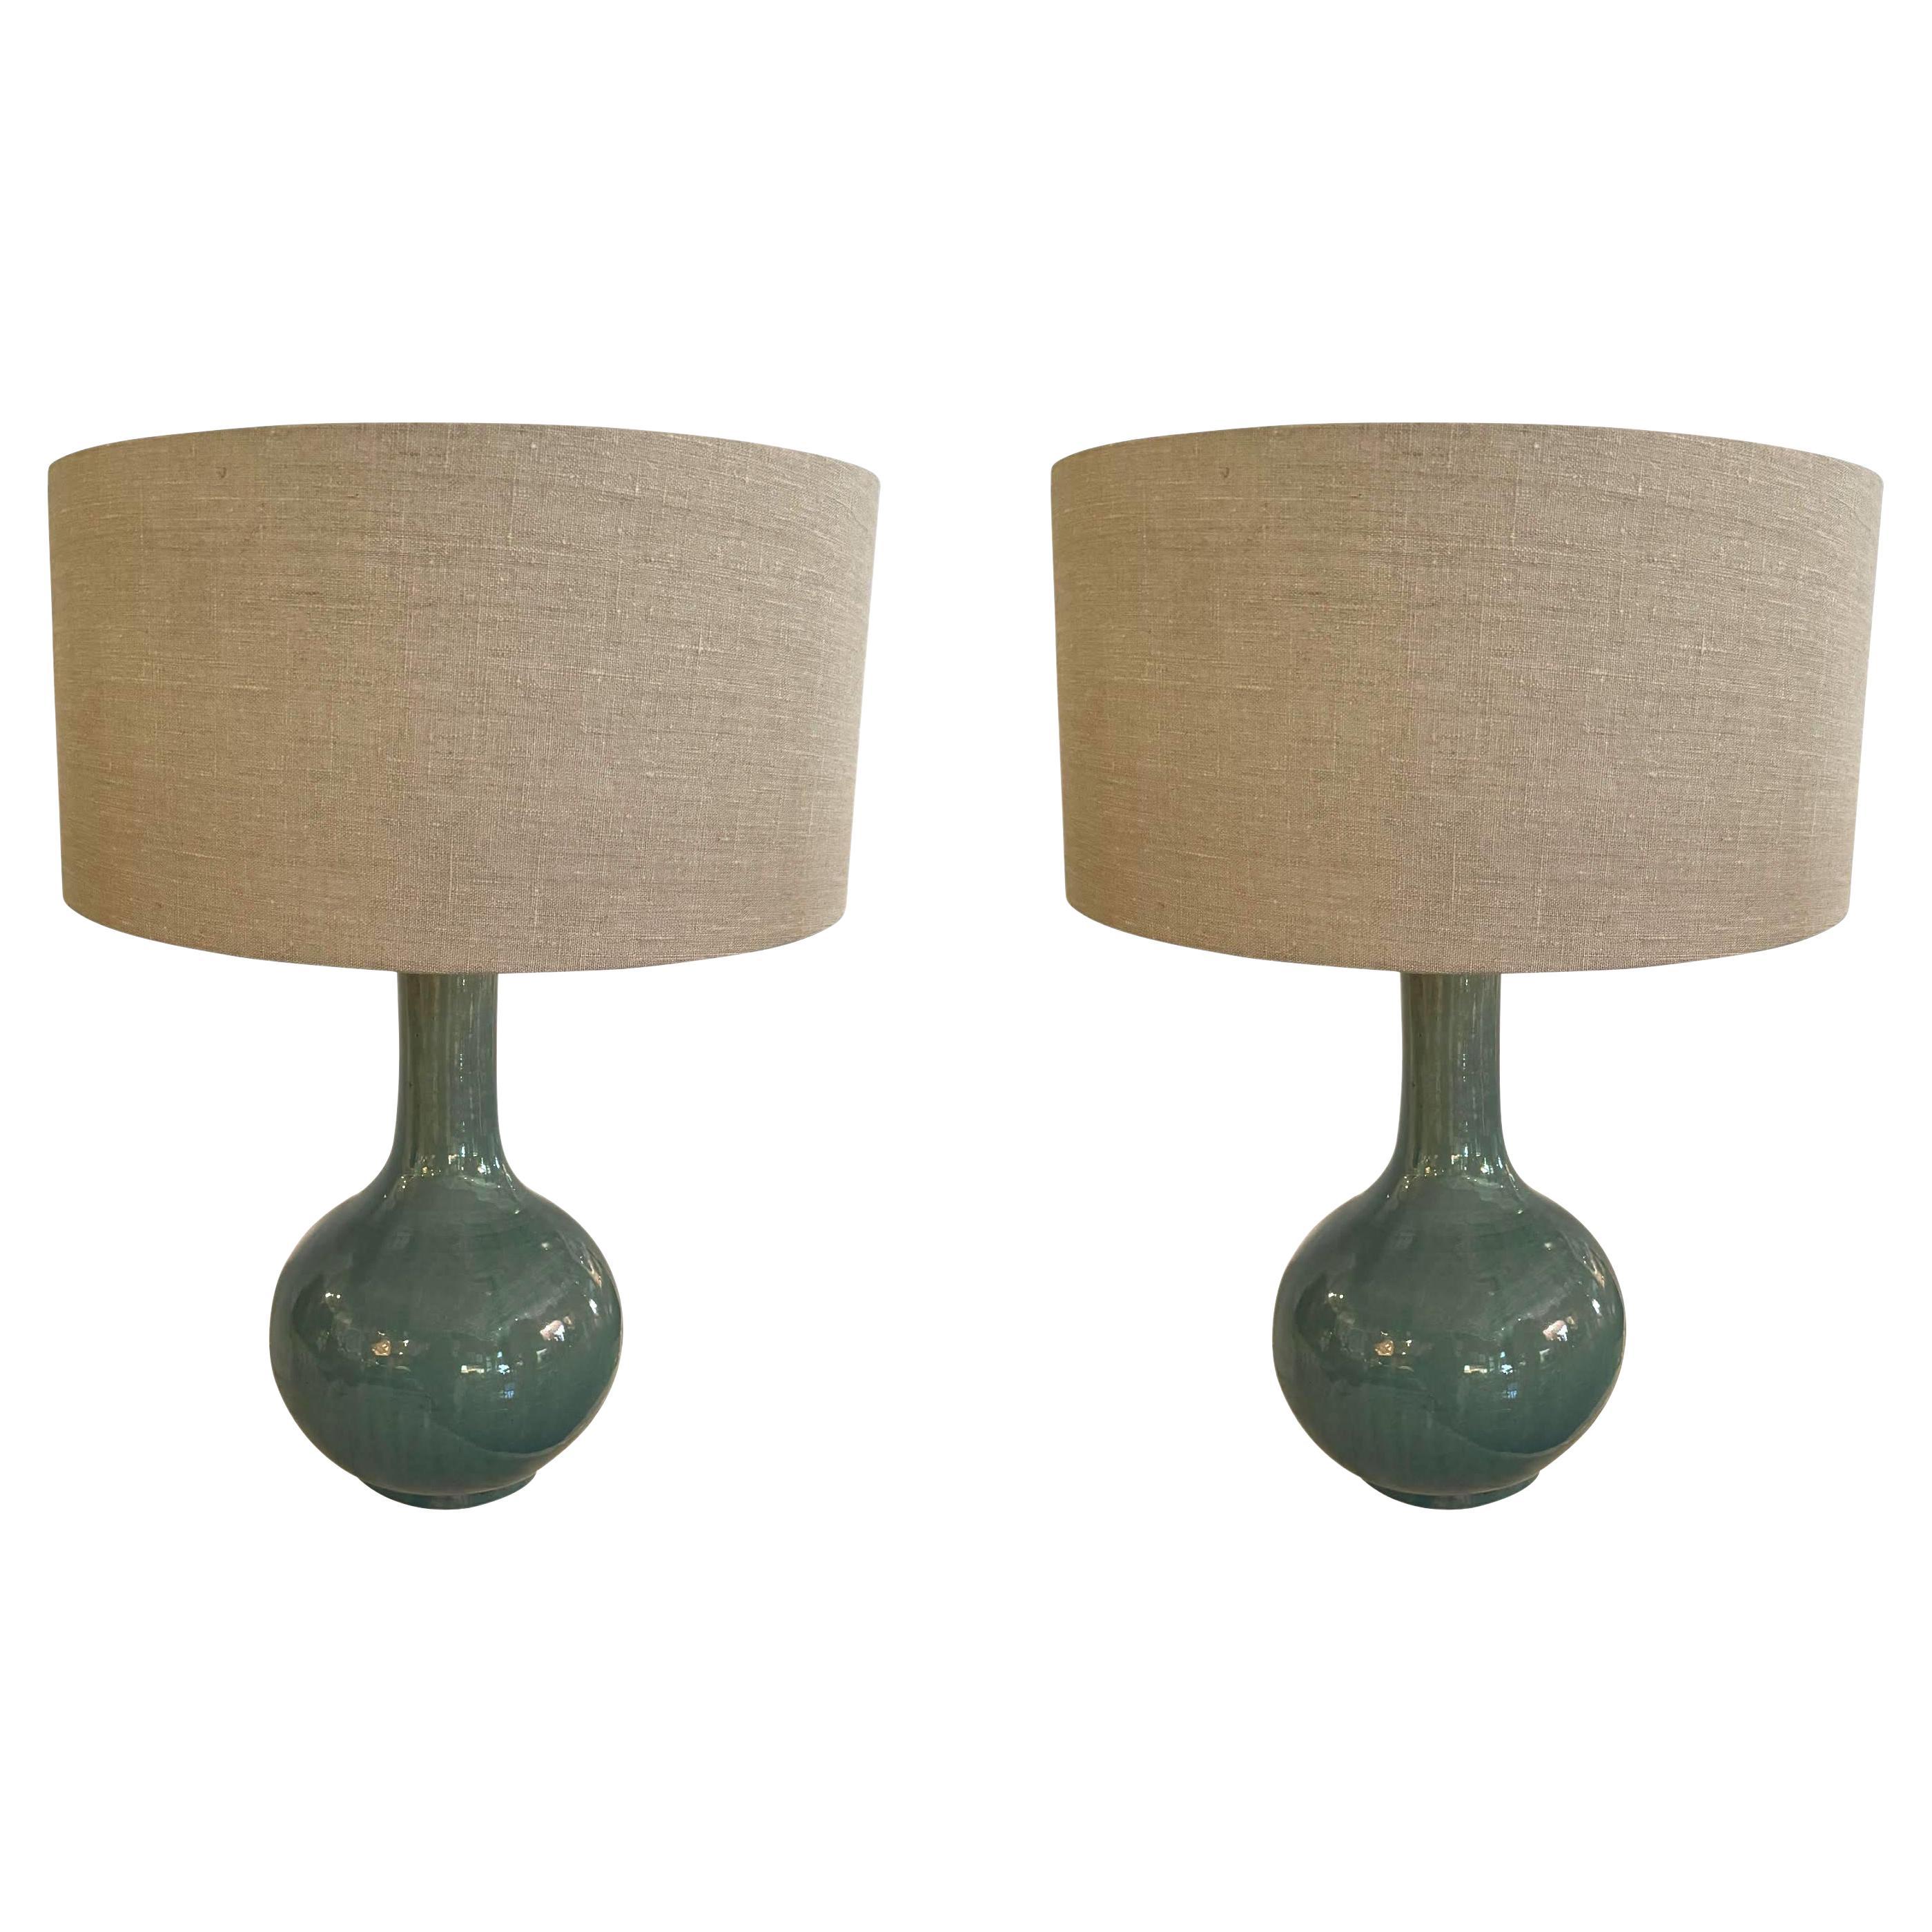 Washed Turquoise Glazed Pair Funnel Neck Table Lamps With Shades, China For Sale